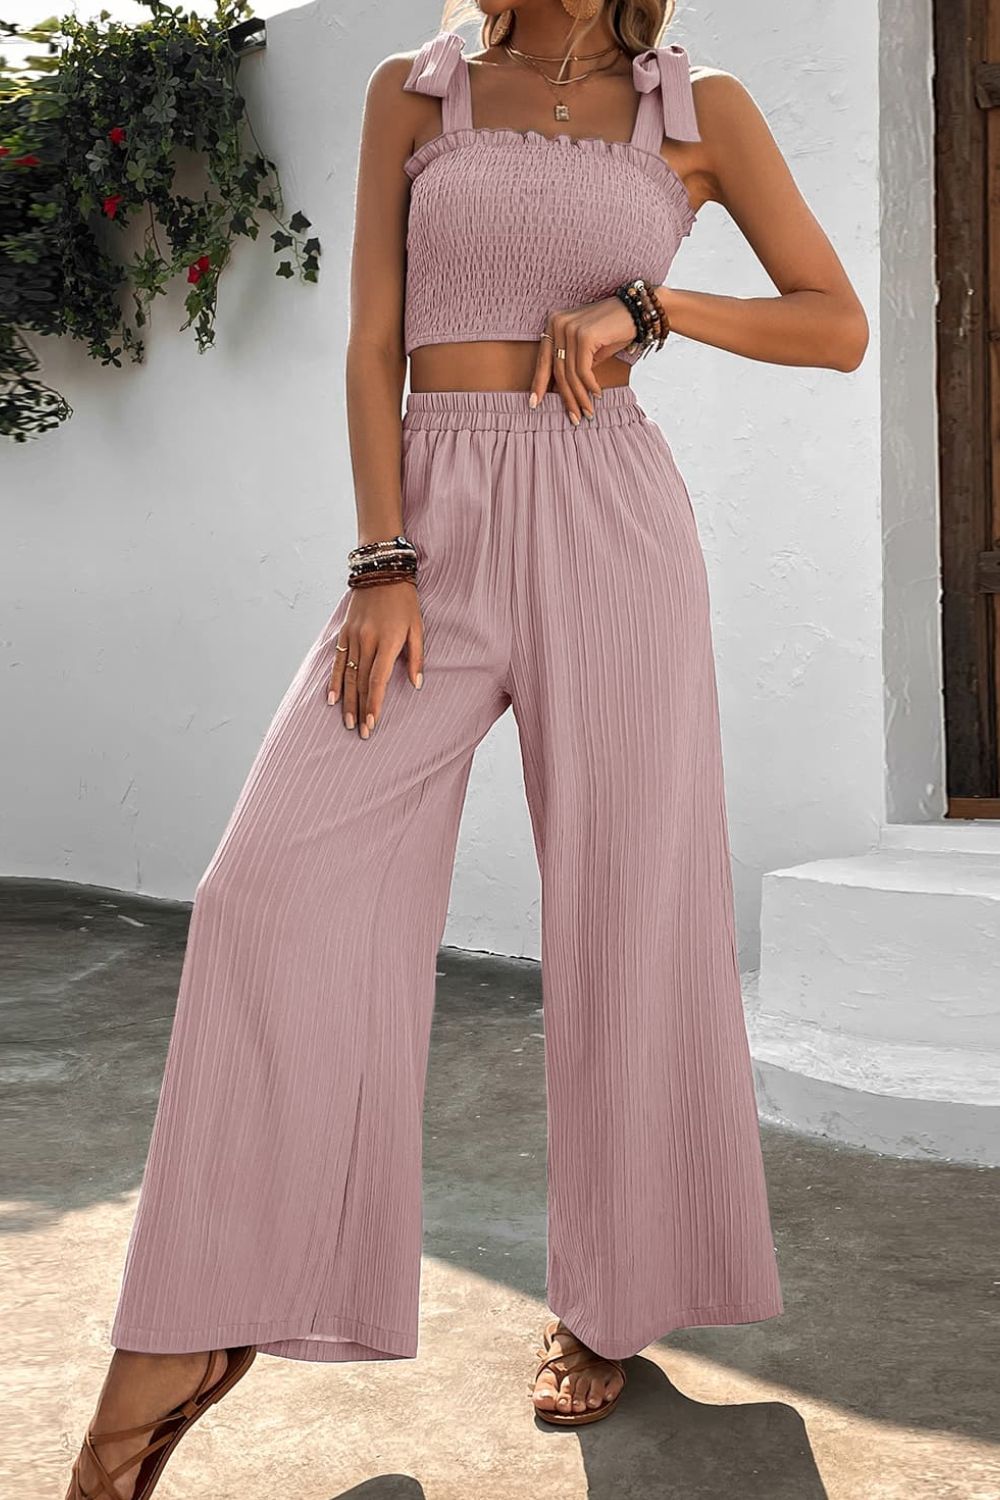 Womens Misses 2-piece Outfit Set including a Stretchy Smocked Crop Top with adjustable tie shoulder straps, Comfort Stretch Elastic Waist Wide Leg Palazzo Pants available in 3 colors: Gum Leaf Green, Light Mauve Pink, and Solid Black